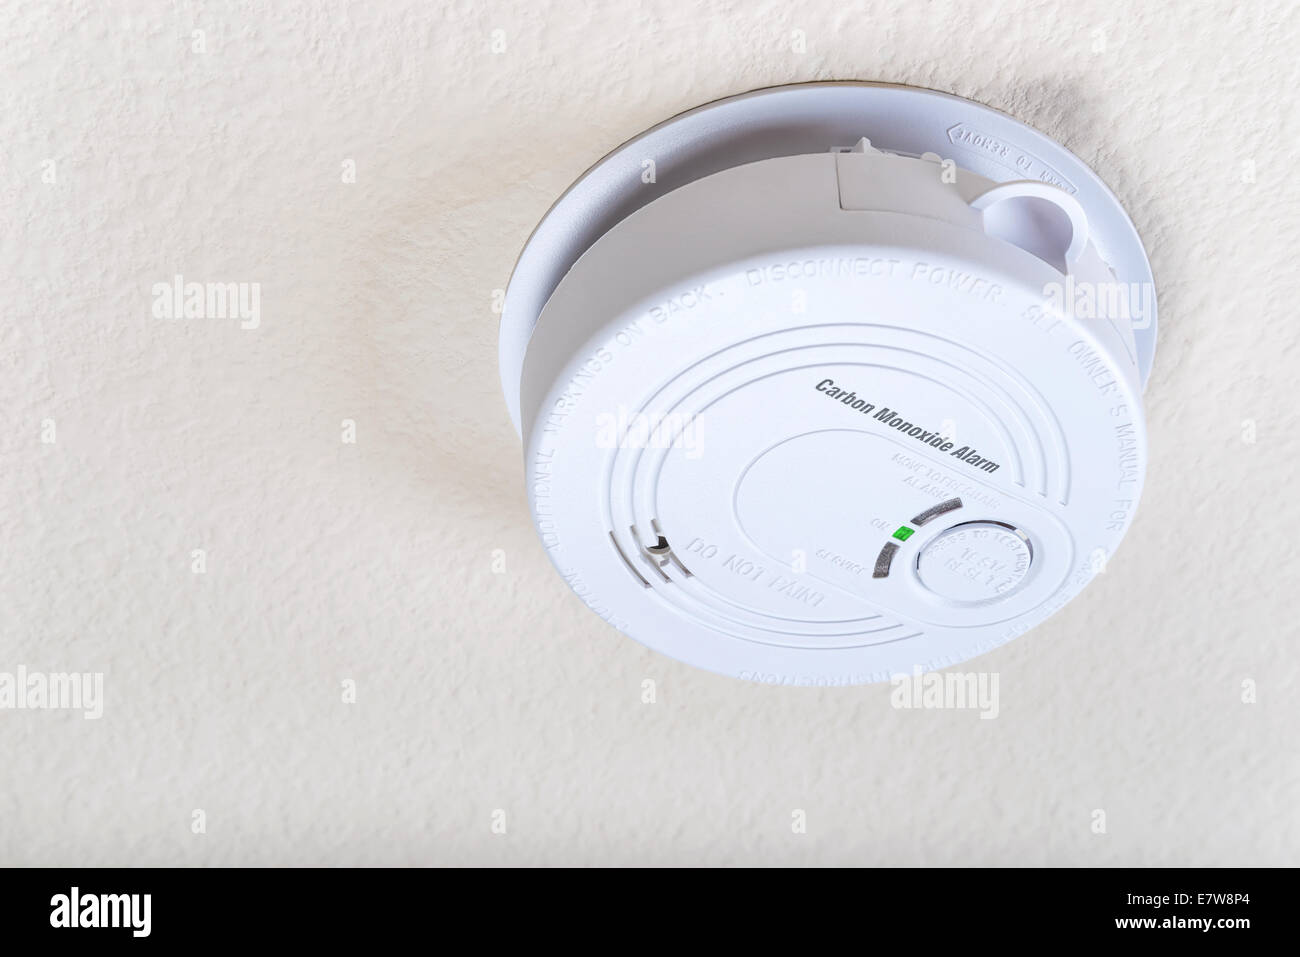 Carbon monoxide alarm mounted on the ceiling Stock Photo